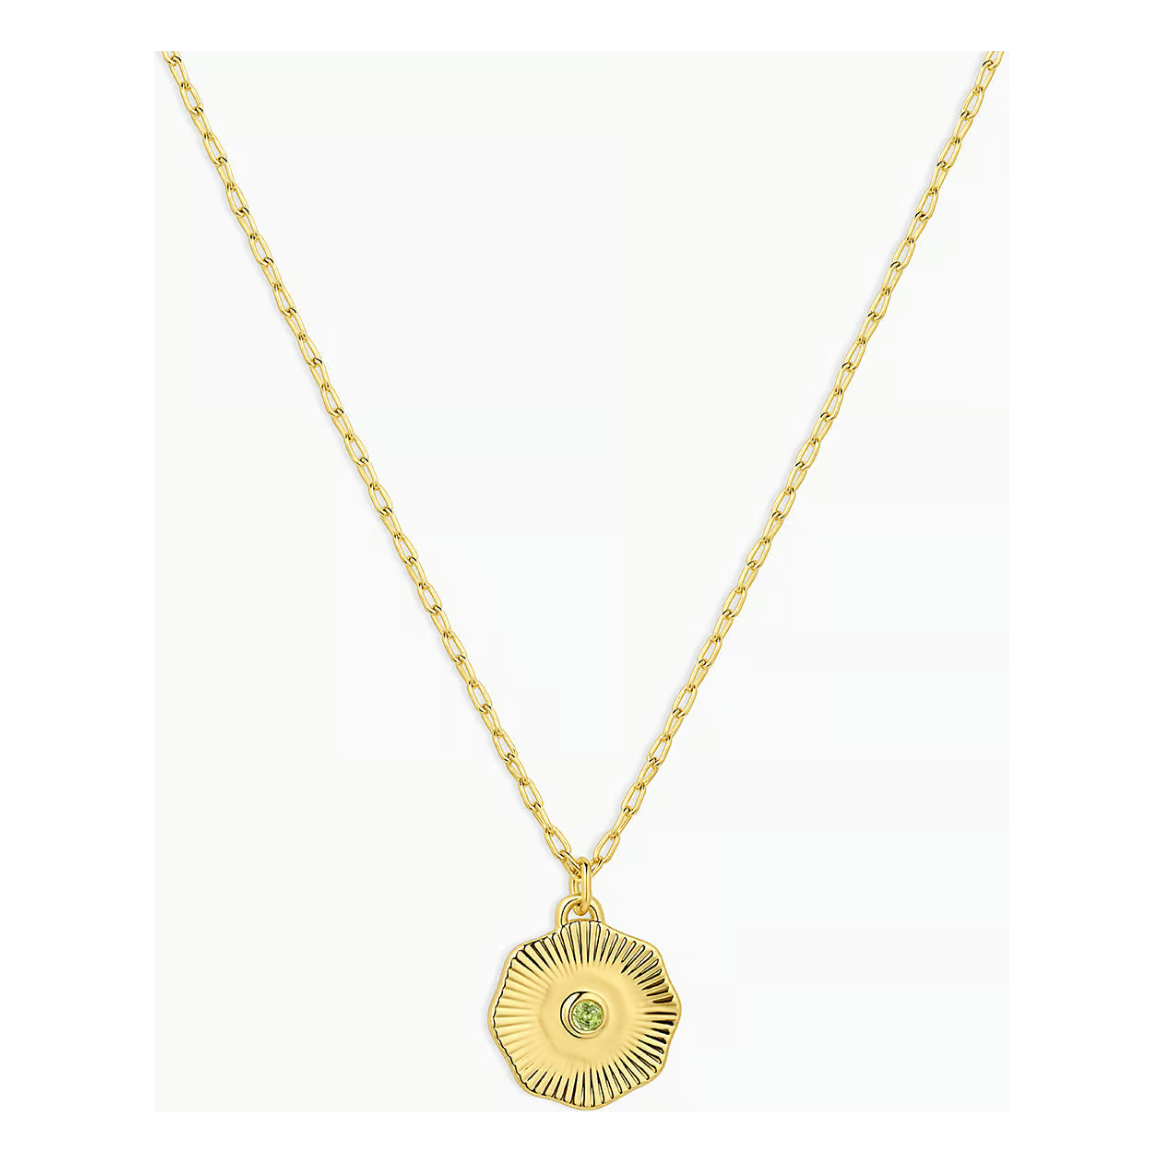 Birthstone Coin Necklace - August